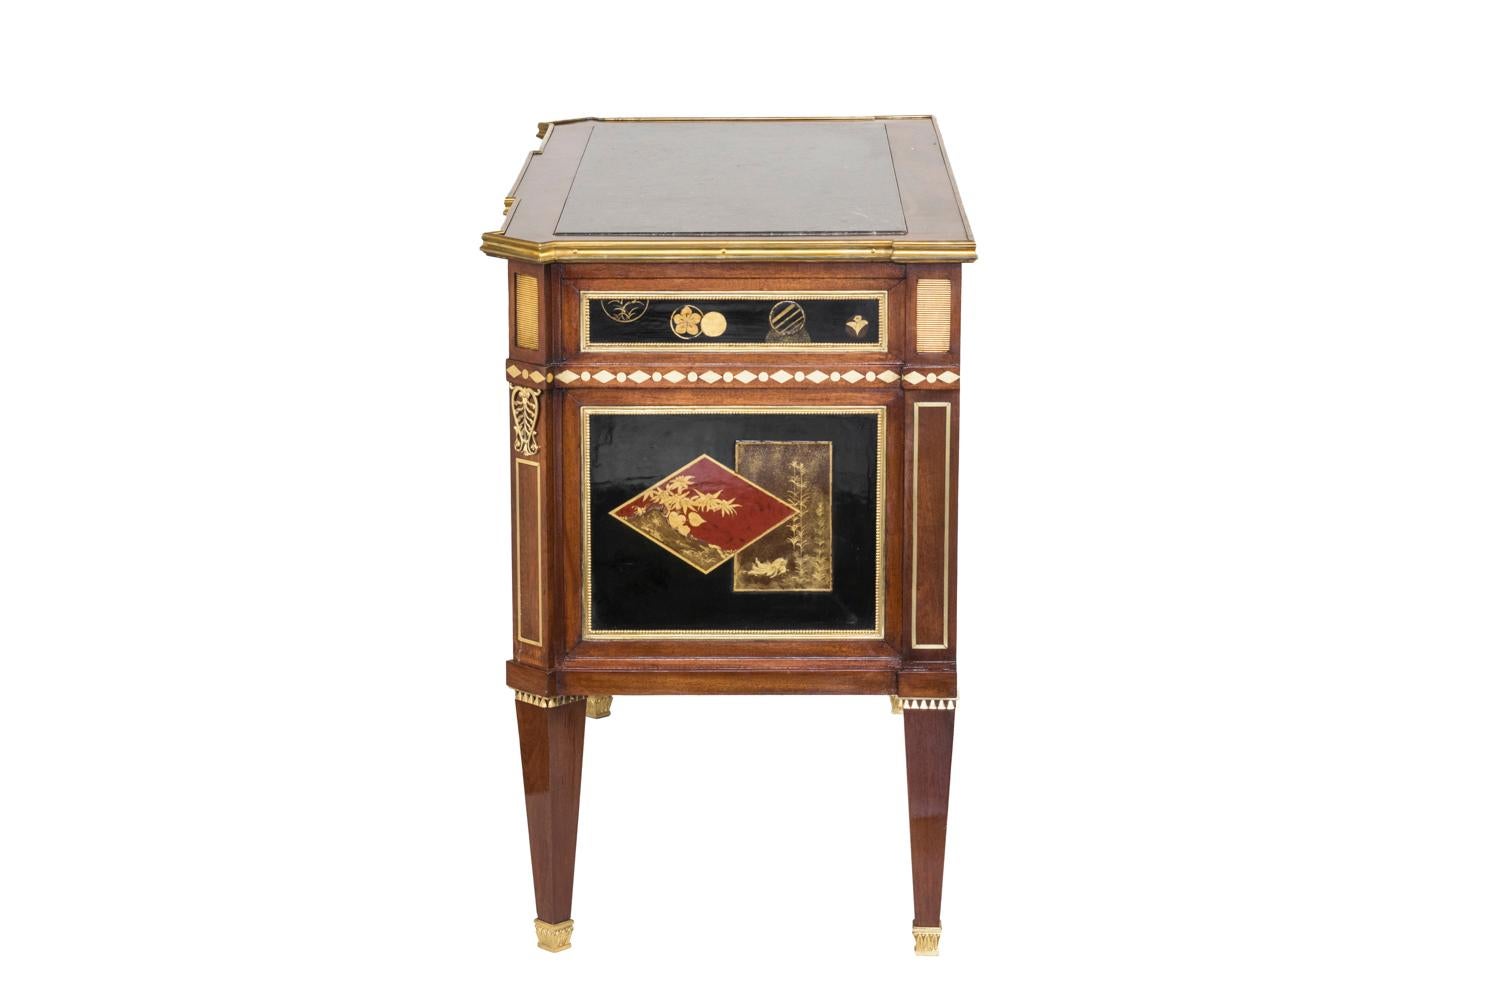 Gilt Louis XVI Style Commode with a Lacquer Decor, Early 20th Century